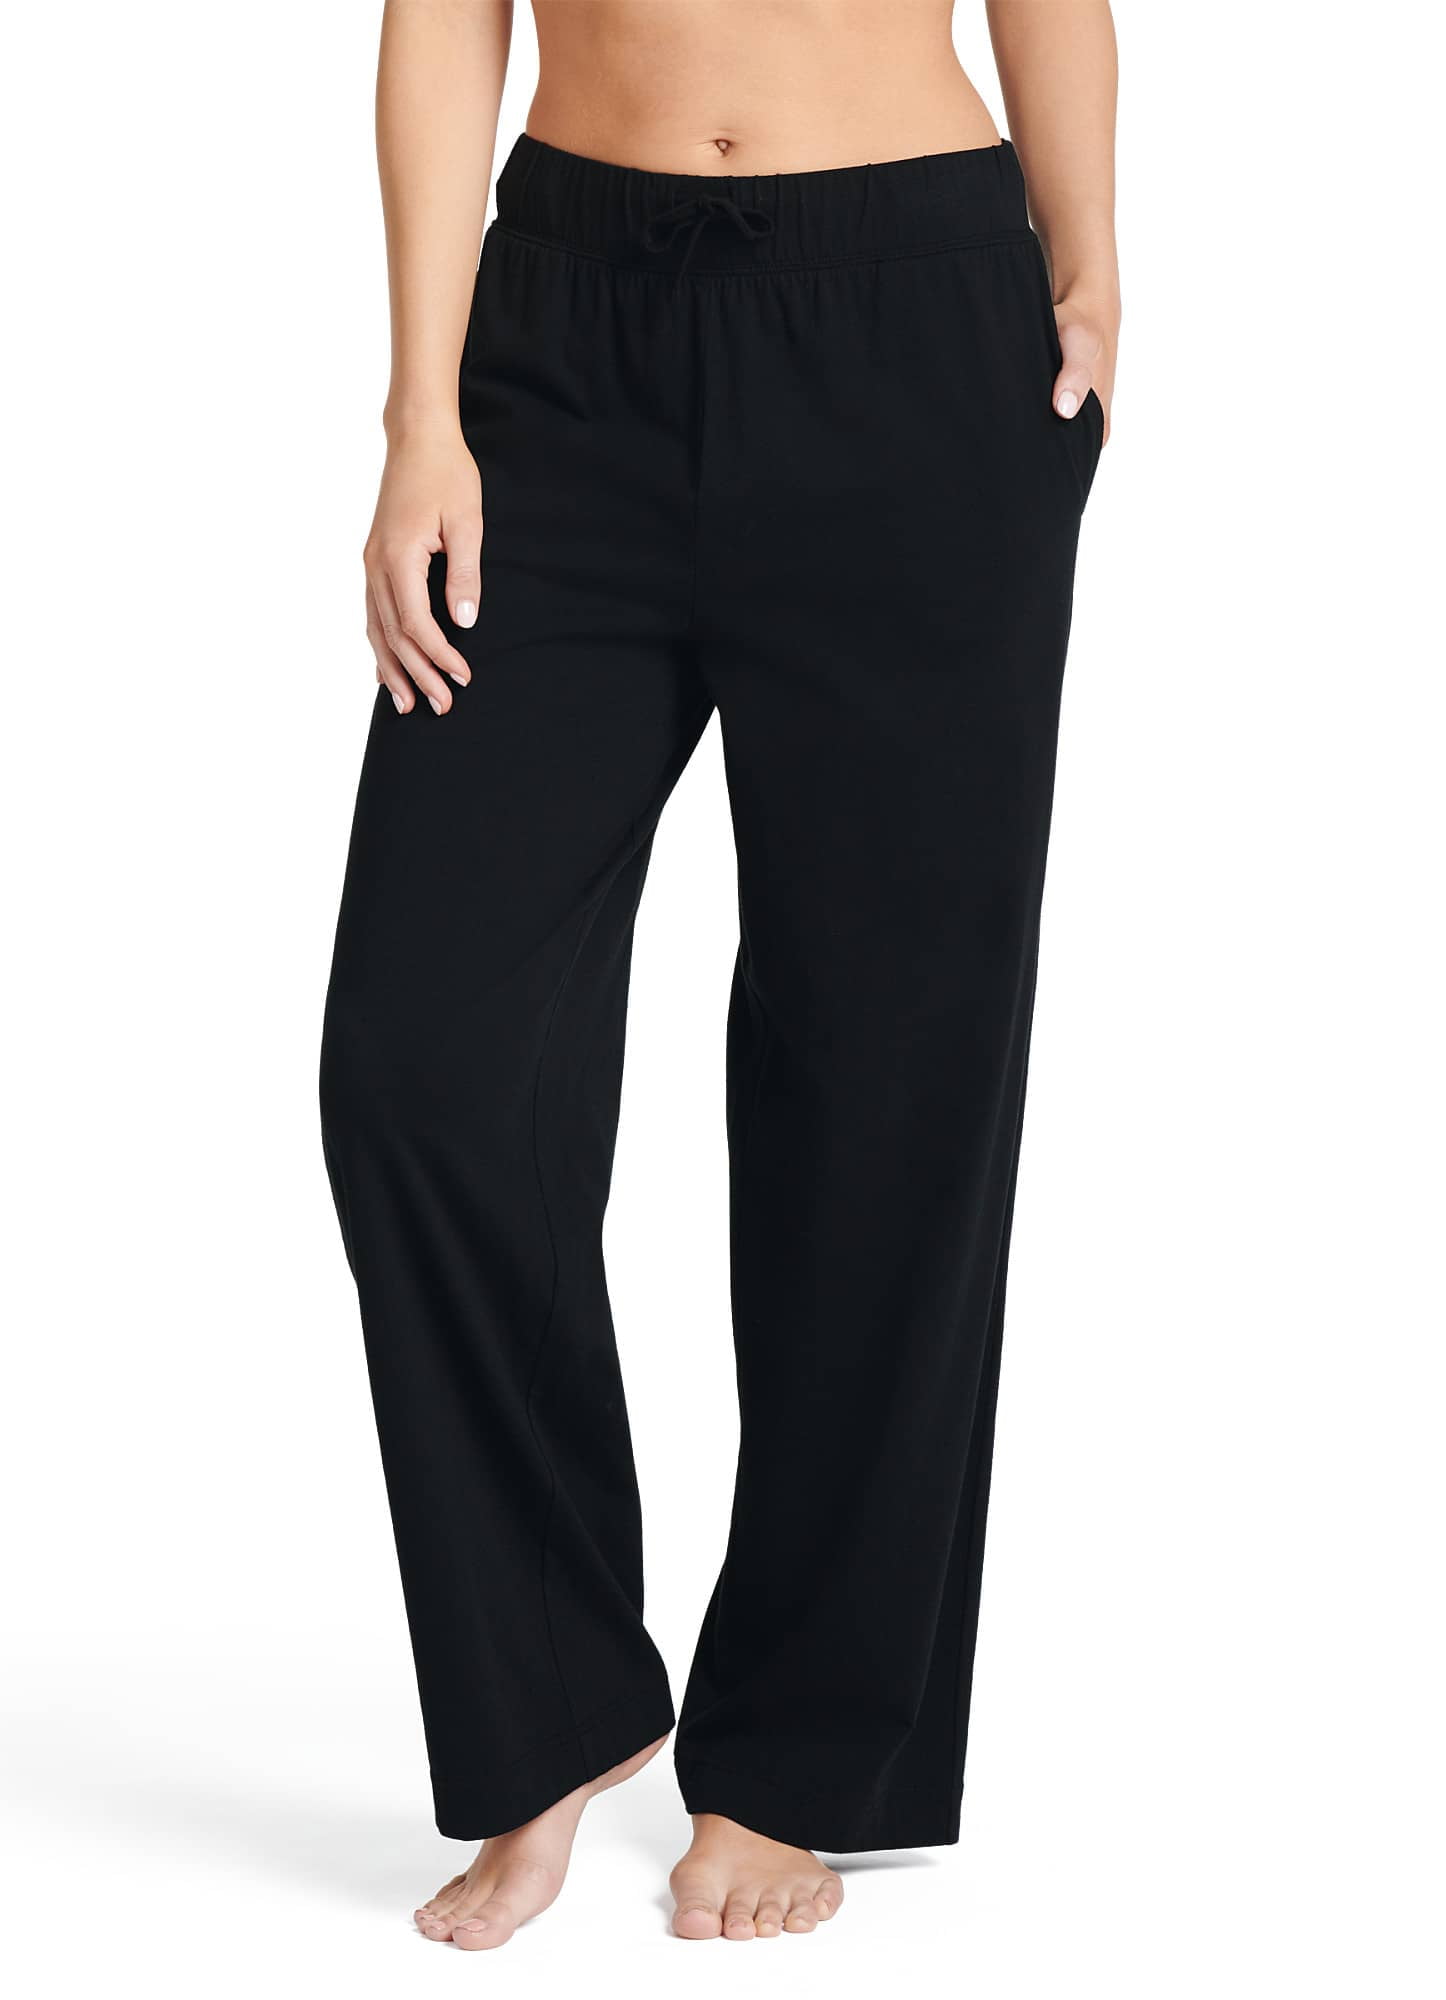 Women's Relaxed Pants